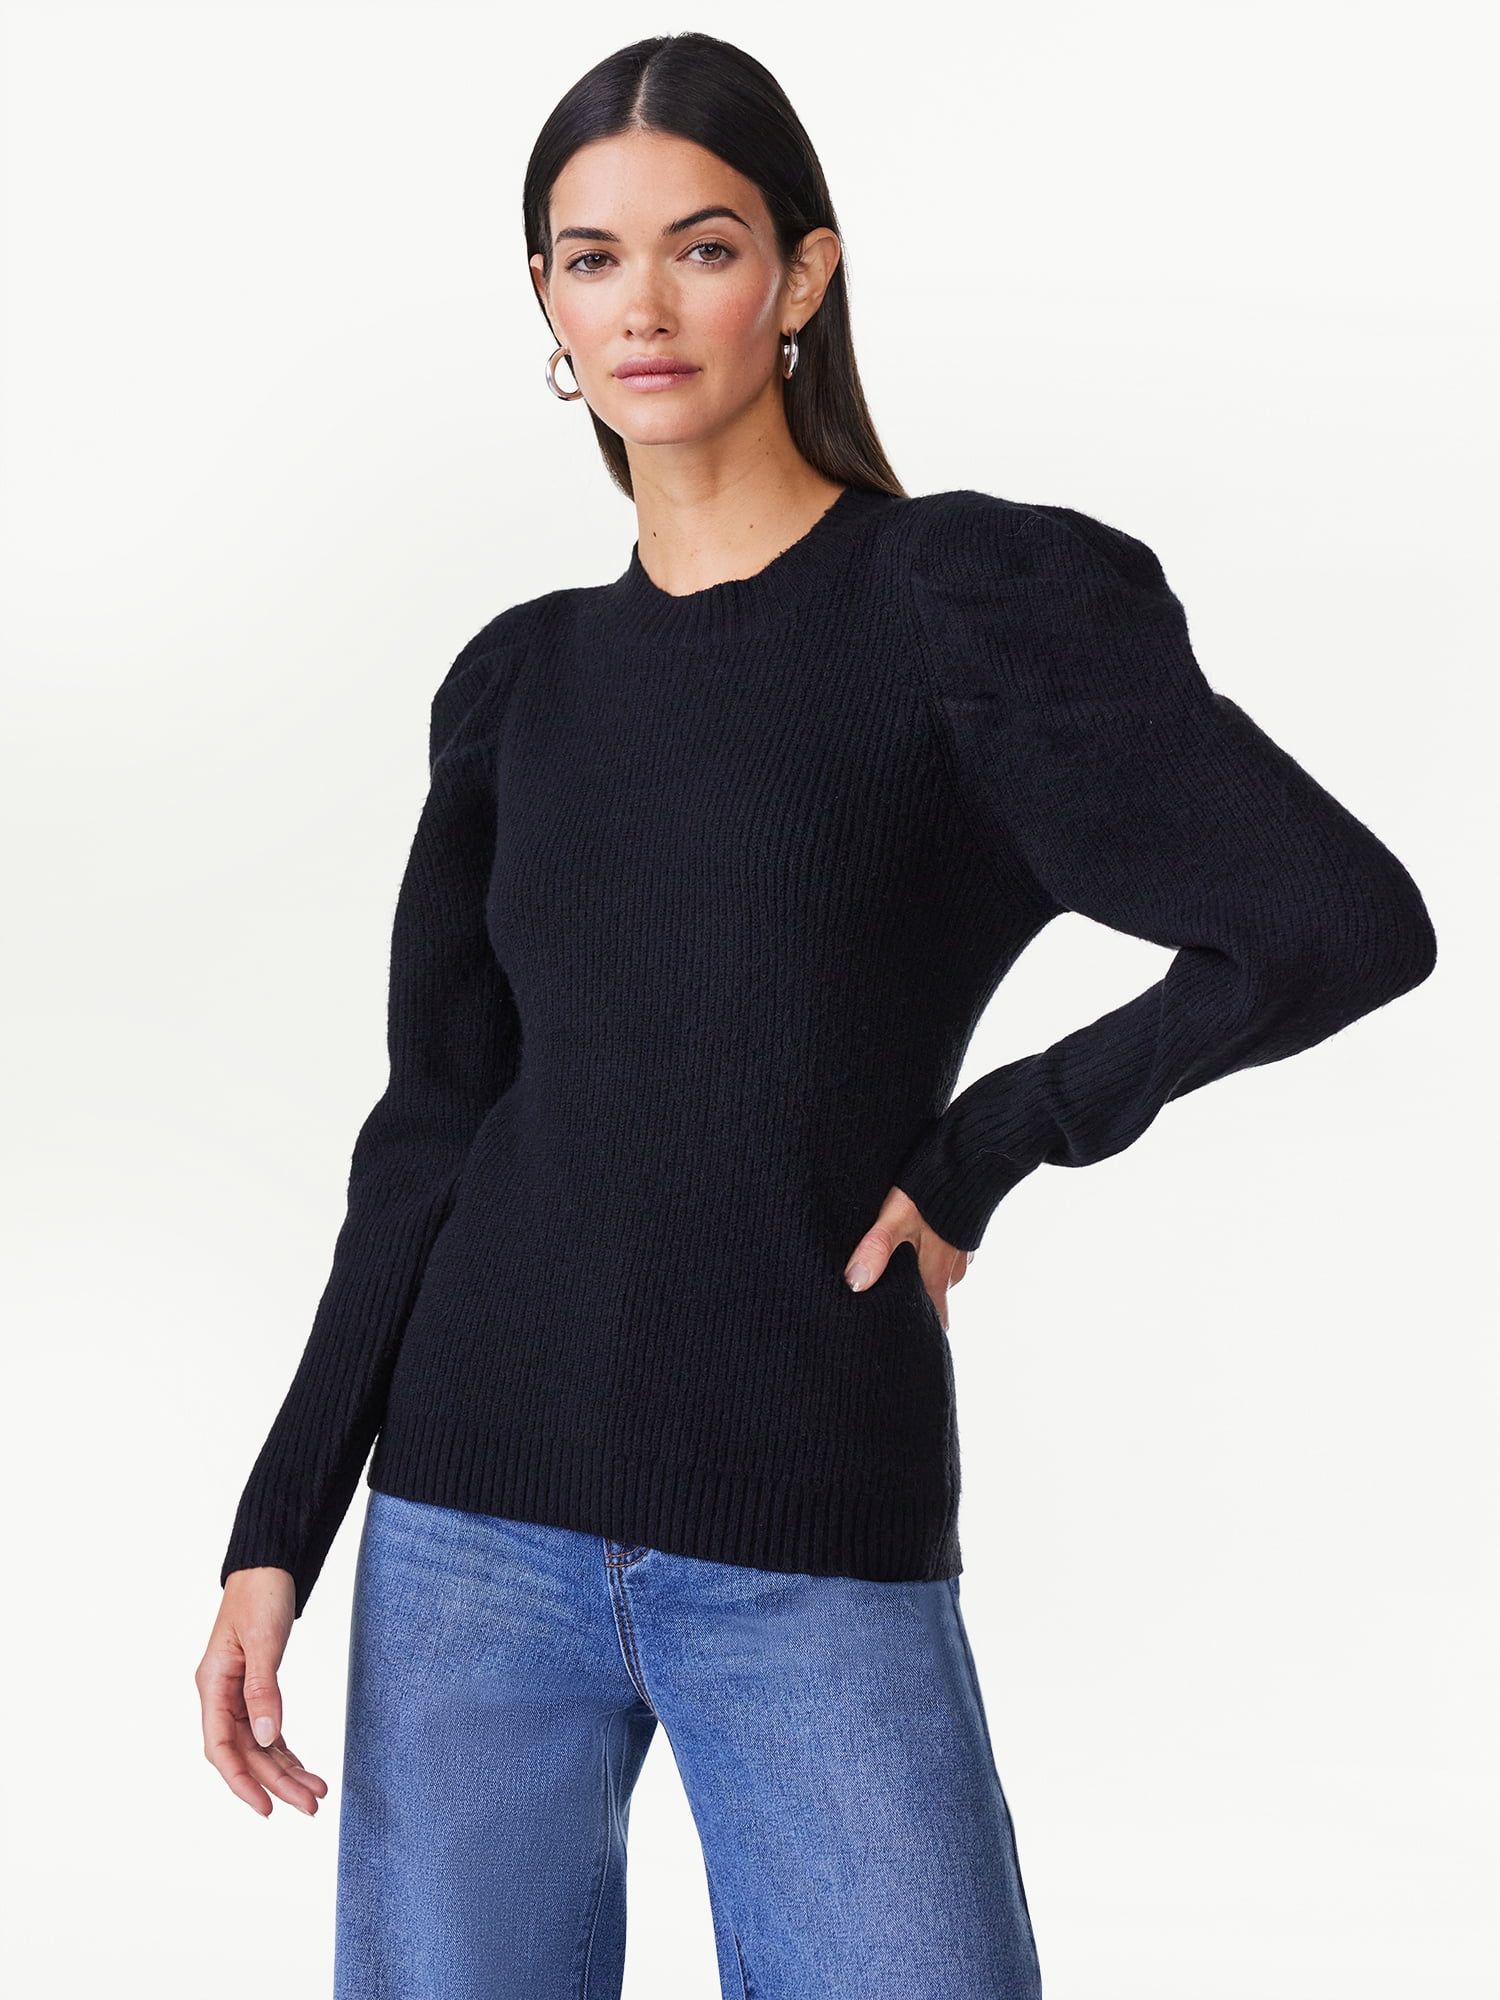 Scoop Women's Pullover Sweater with Long Sculped Sleeves, Sizes XS-XXL | Walmart (US)